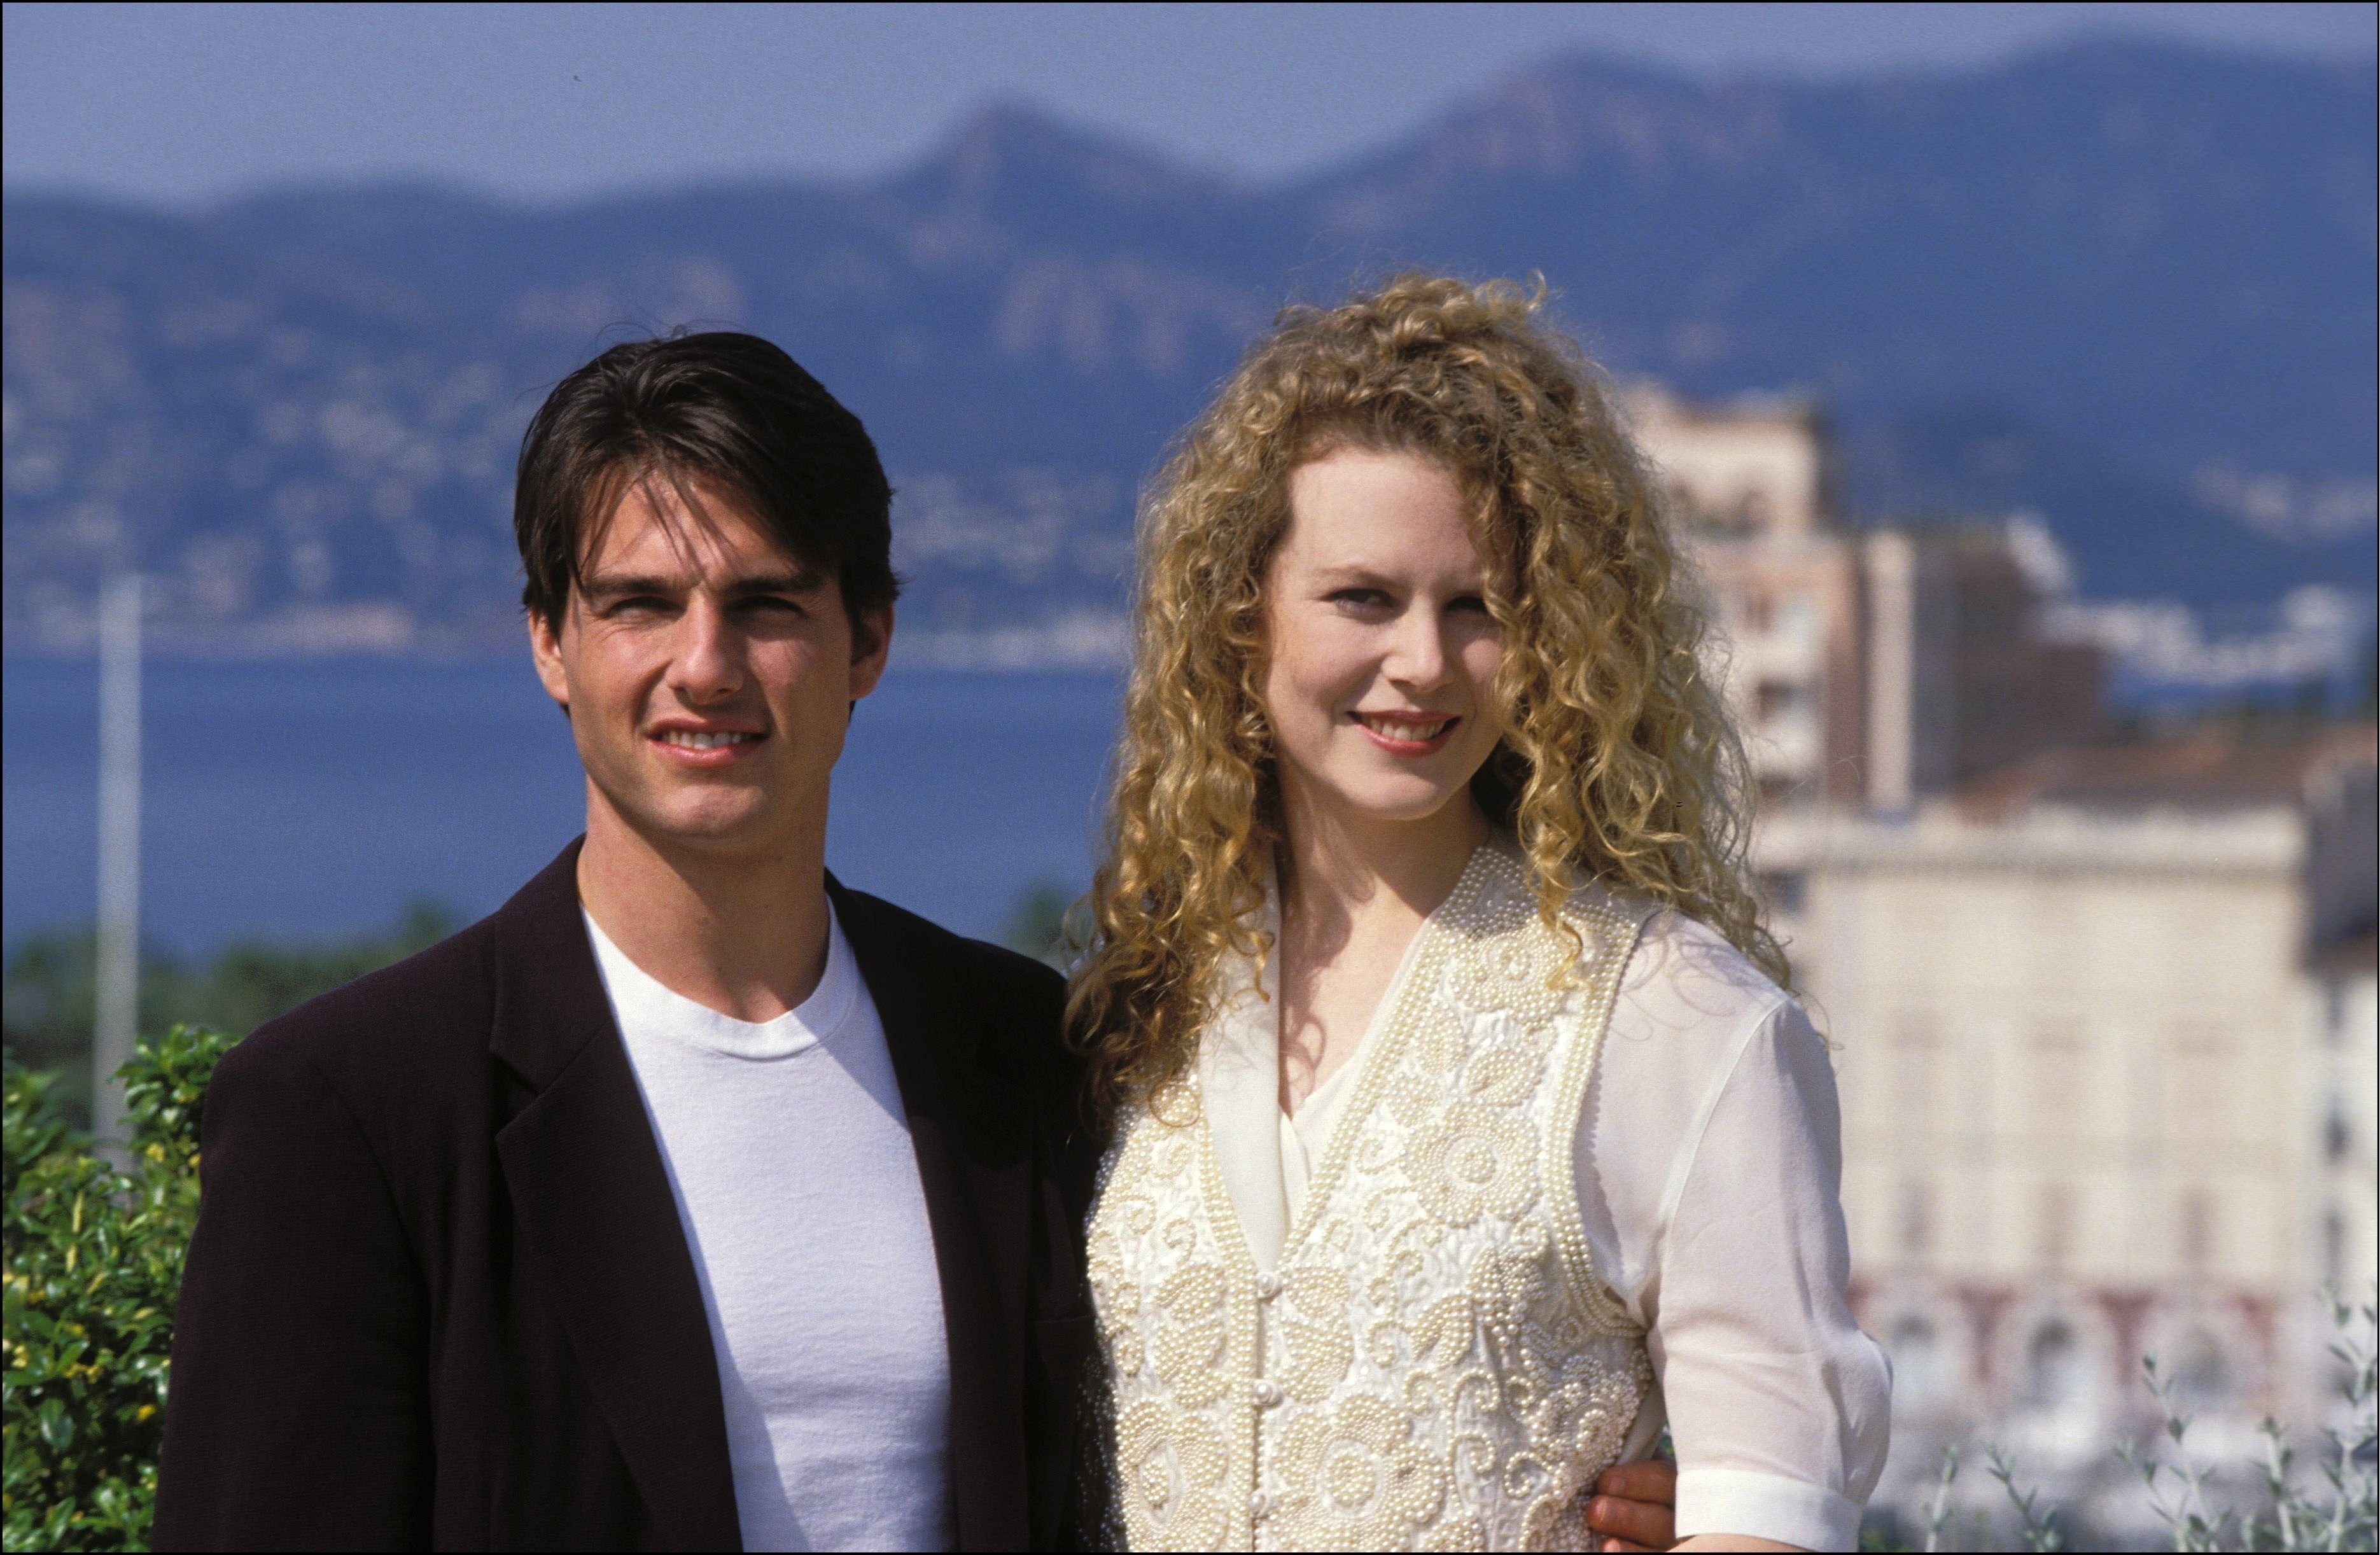 Tom Cruise and Nicole Kidman in Cannes, France. | Source: Getty Images